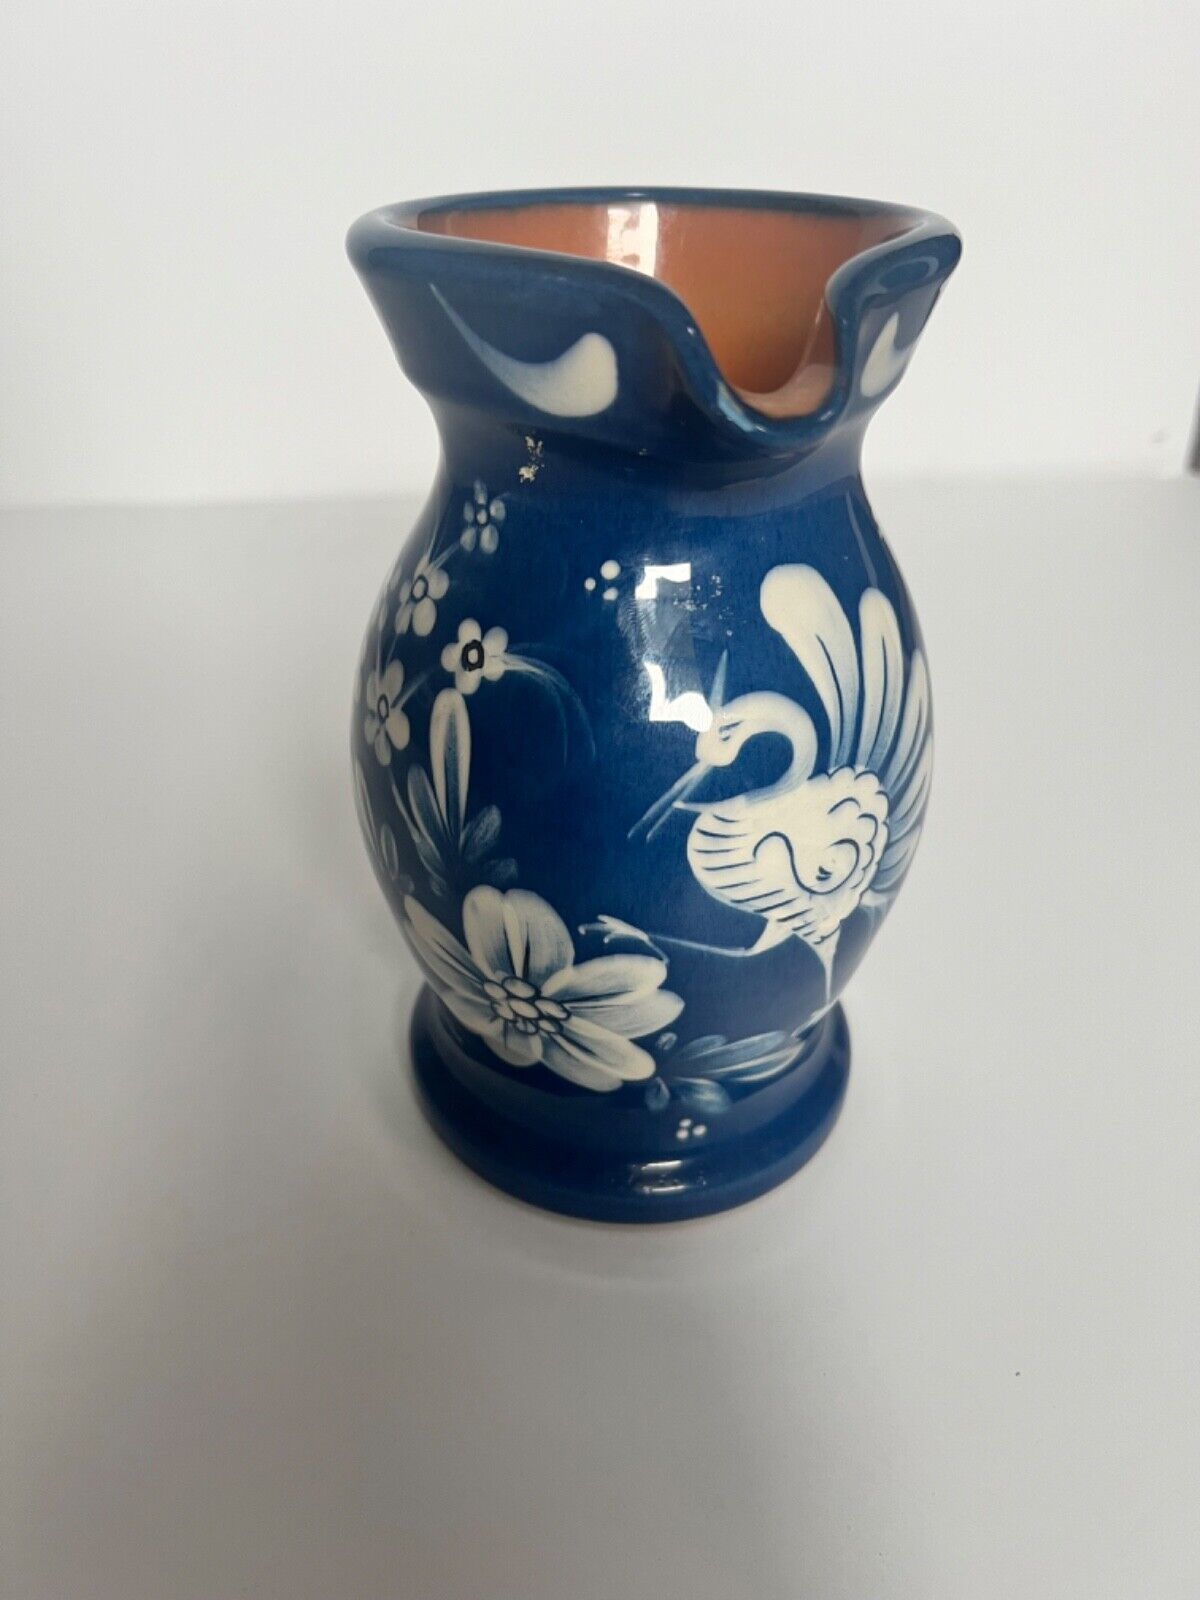 Vintage blue, white and orange pitcher. Handcrafted/painted. 6 inches tall